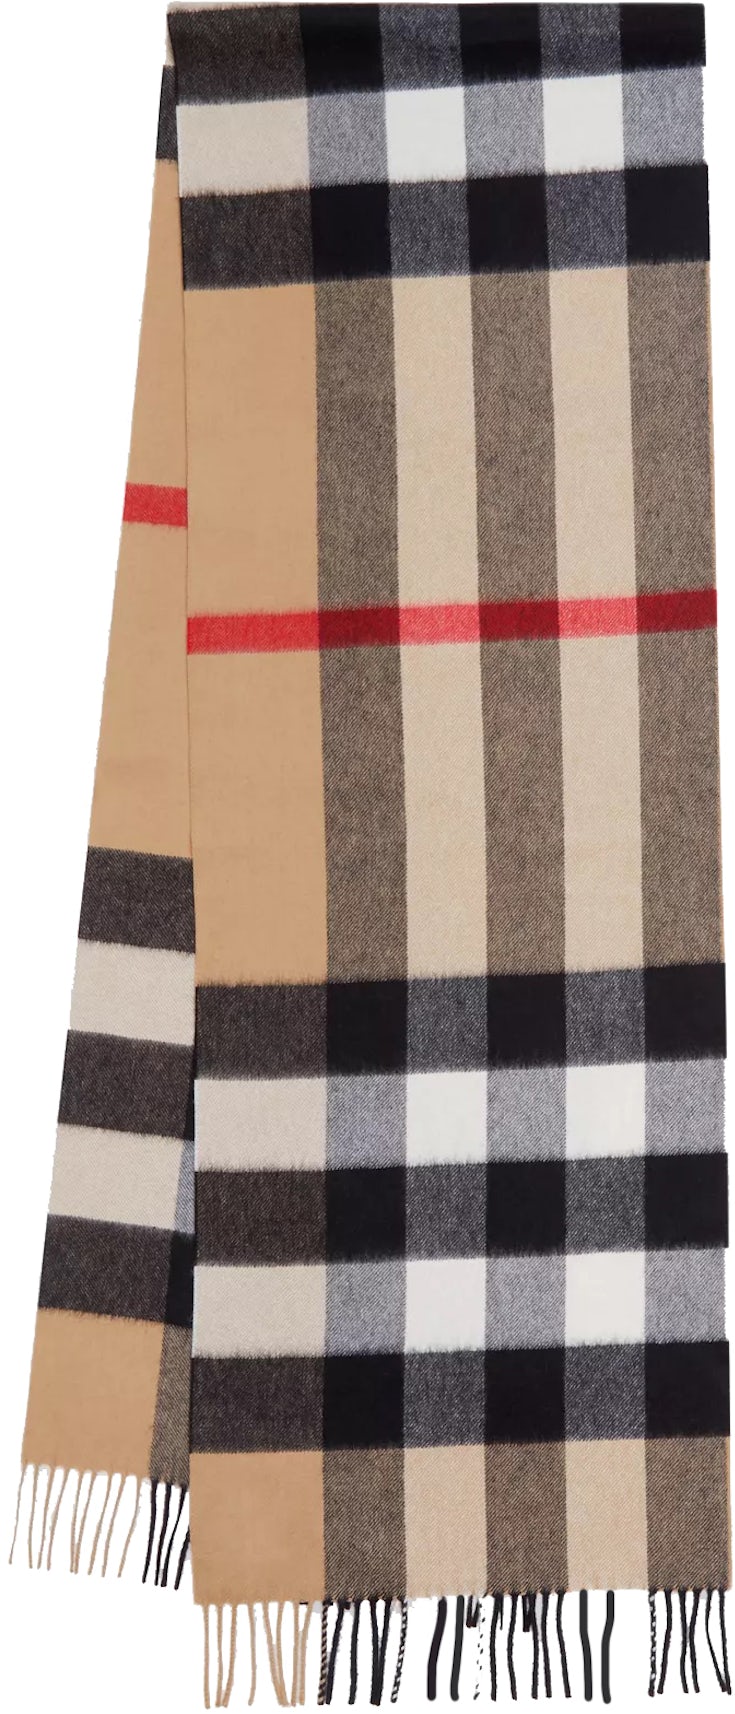 How can I spot a fake Burberry silk scarf? - Questions & Answers